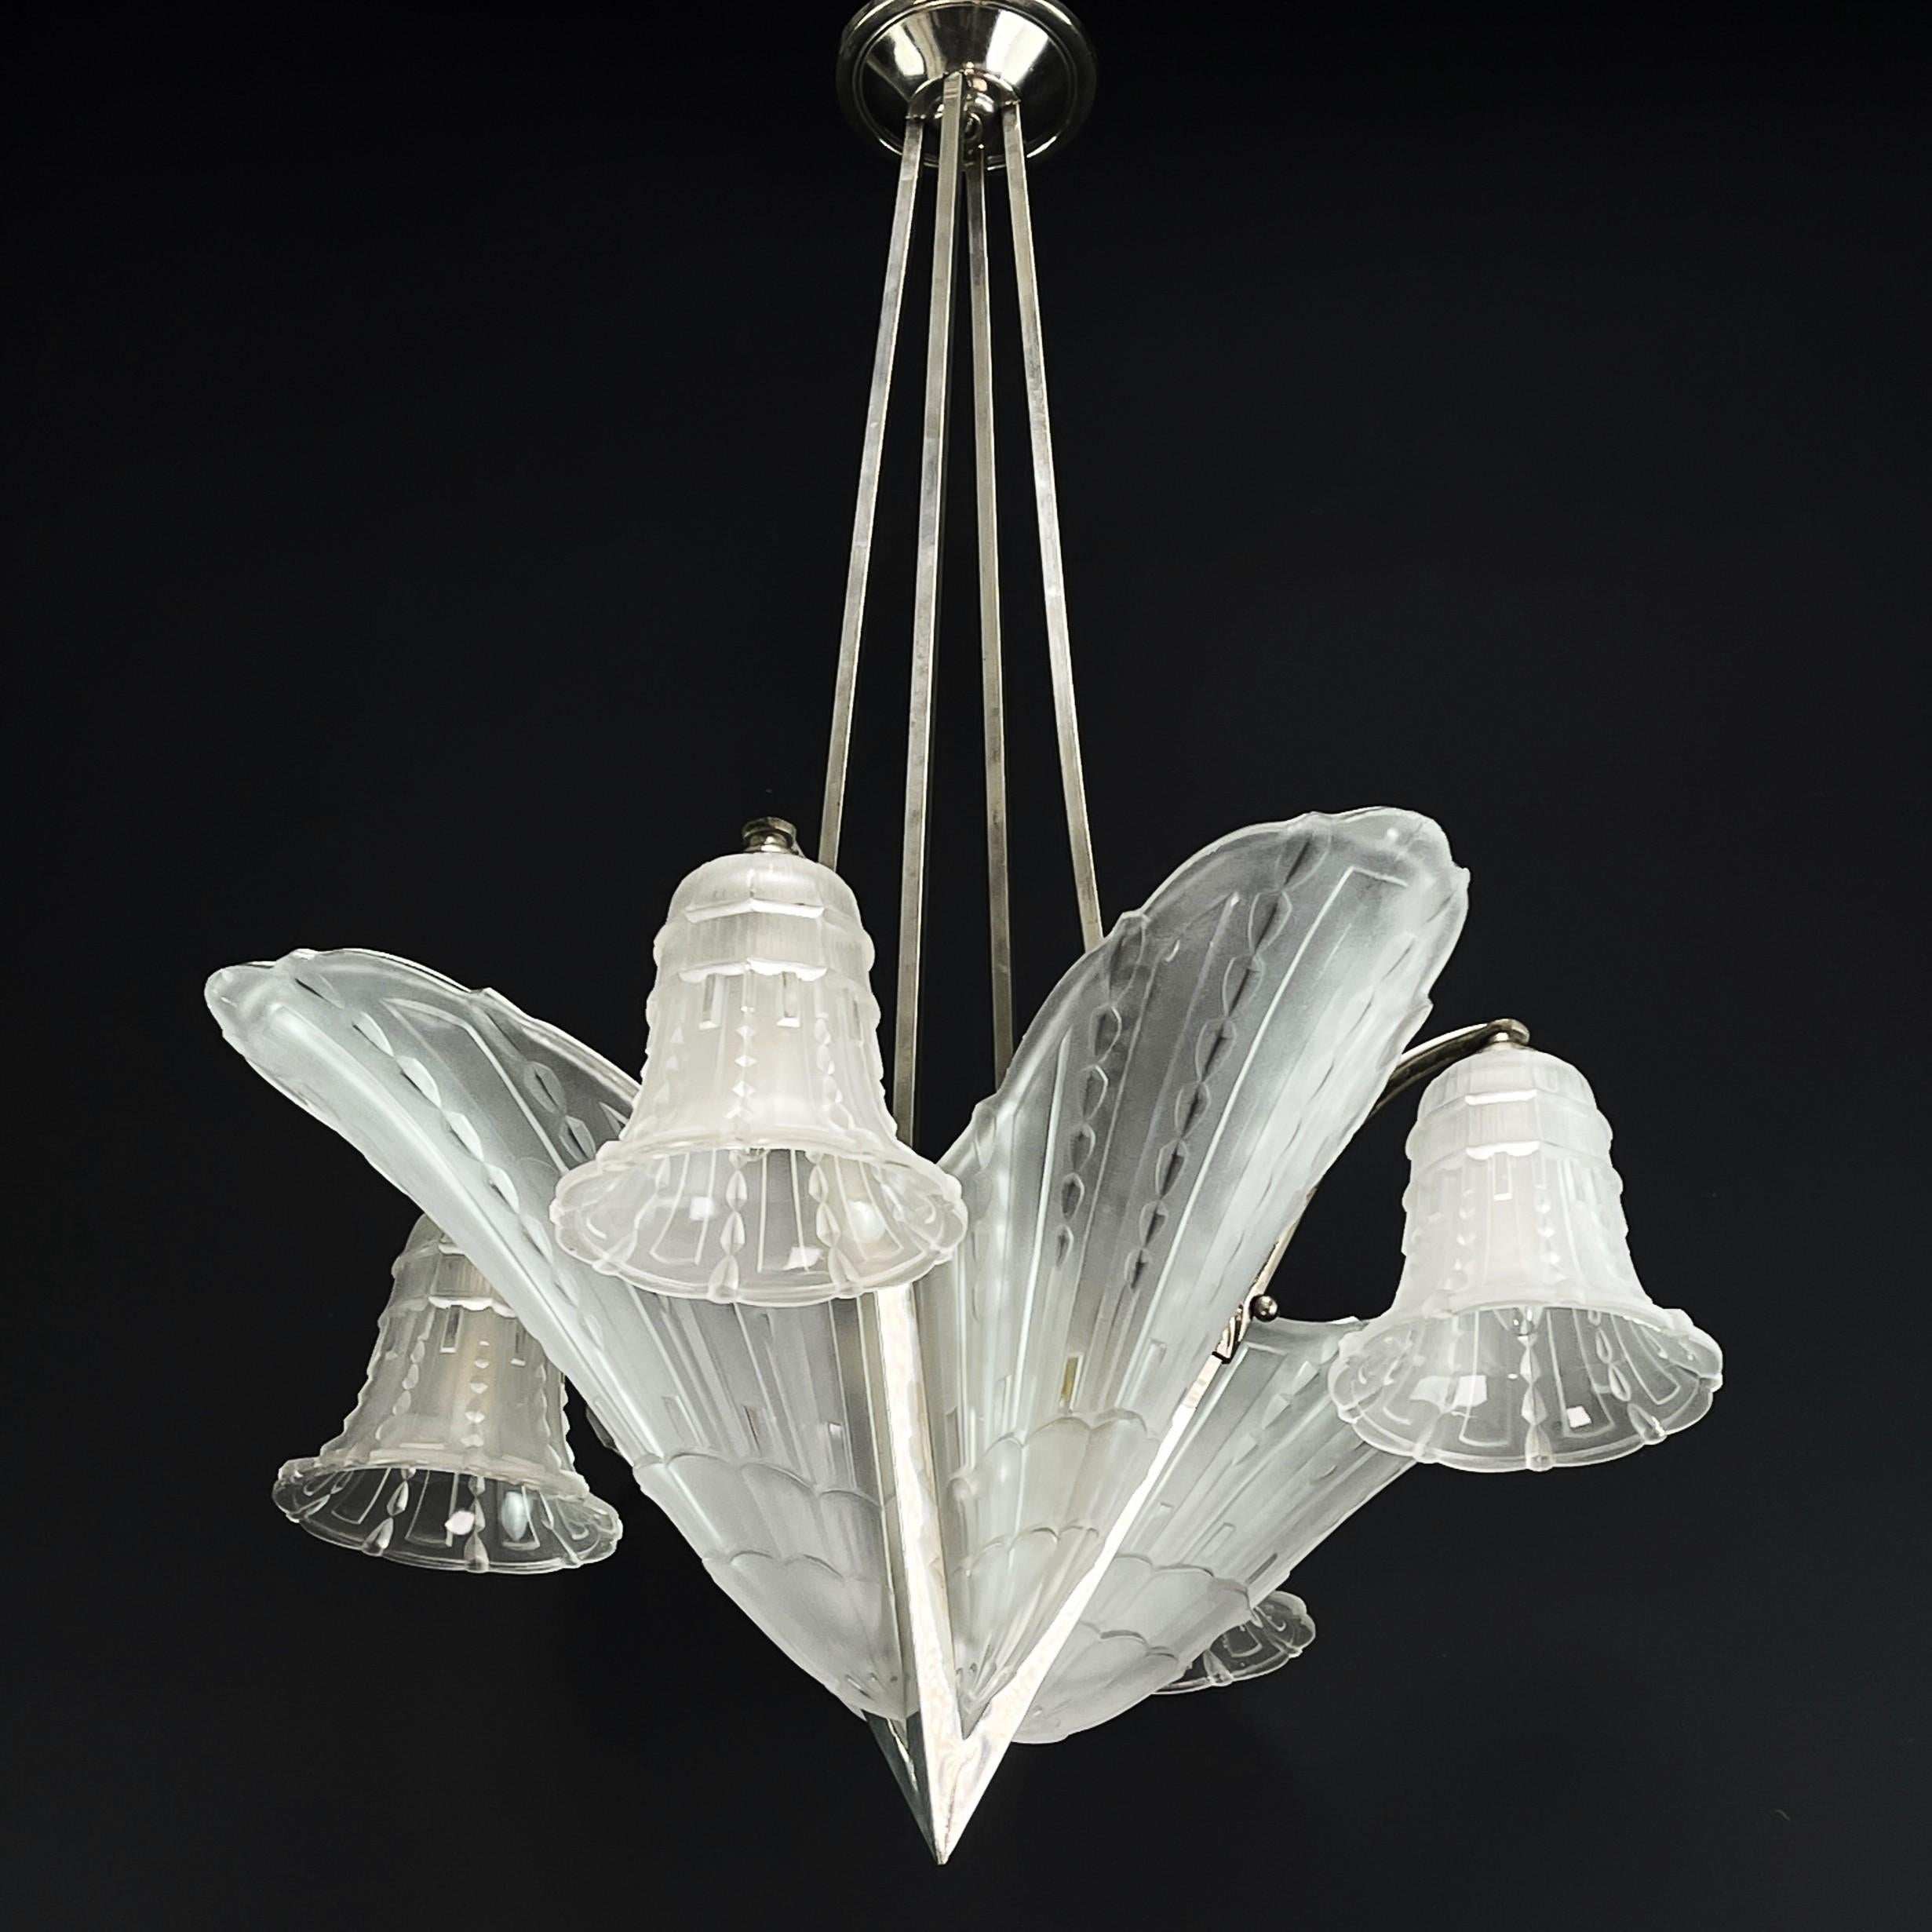 Art Deco Chandelier from 1930s

The ART DECO ceiling lamp is a remarkable example of the craftsmanship and style of the early 20th century. 

This stunning Art Deco chandelier from the 1930s is an outstanding example of the elegance and